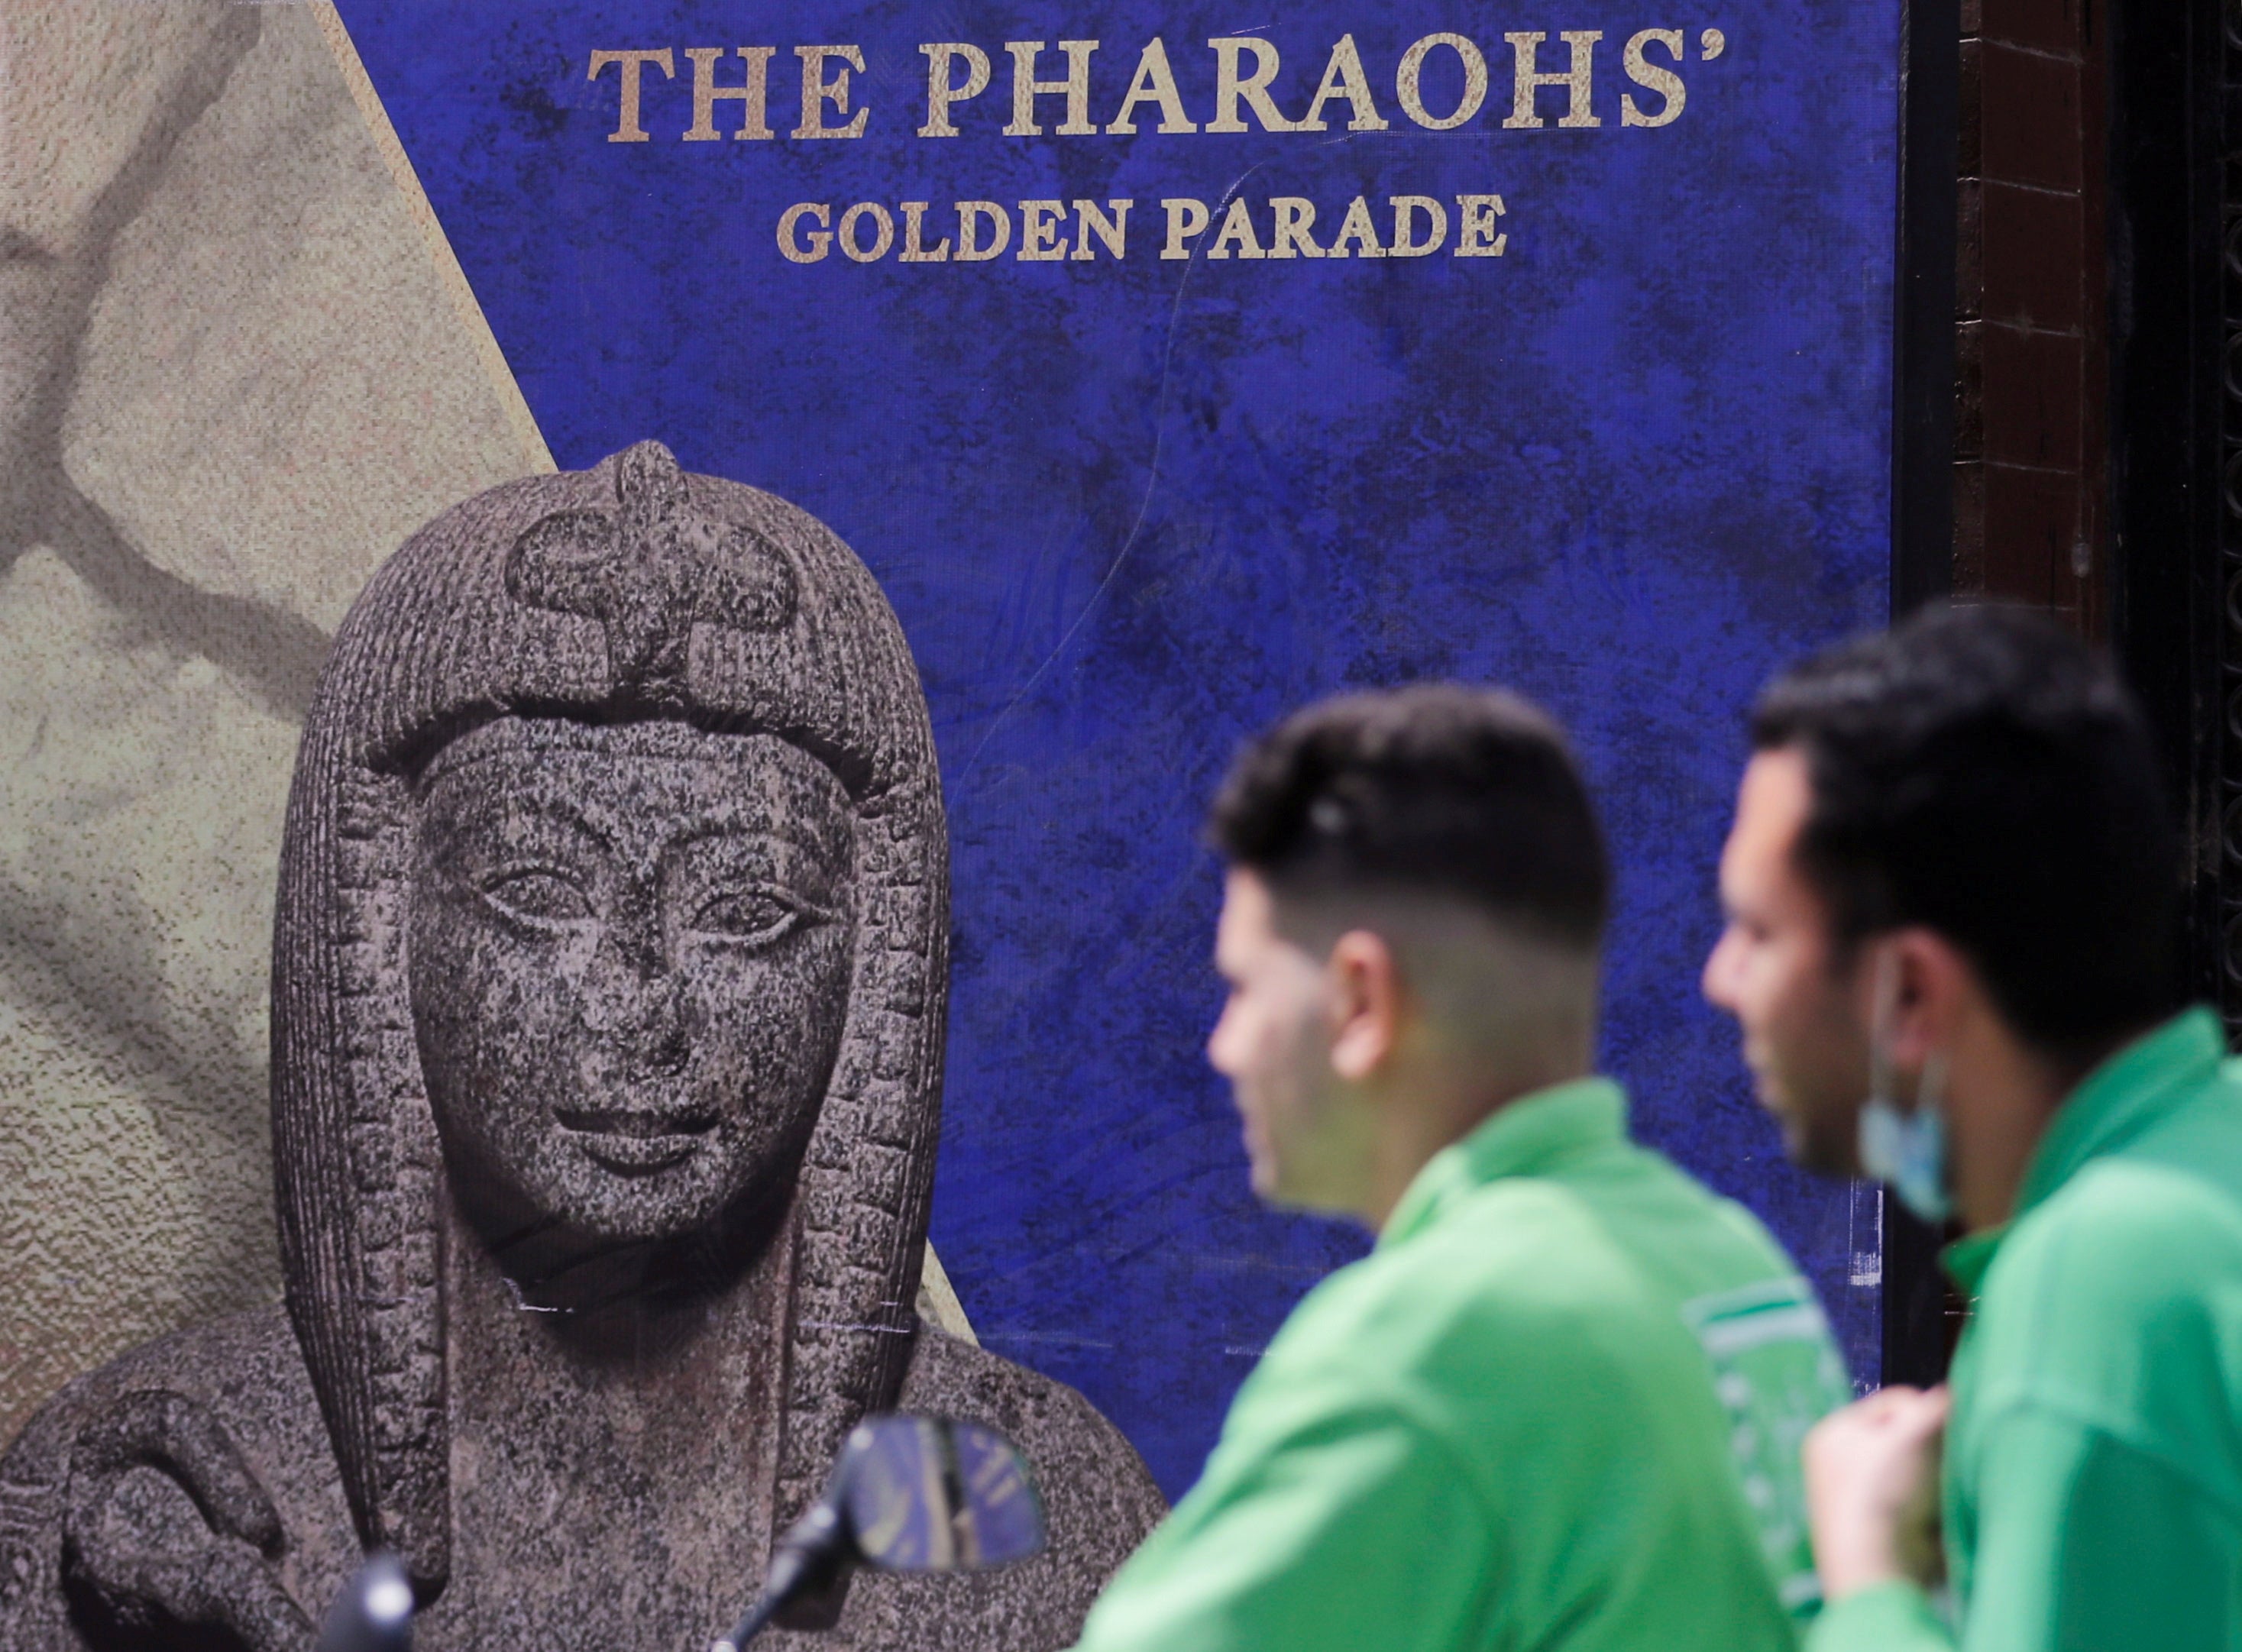 Men pass in front of poster for the Pharaohs’ Golden Parade after the renovation of Tahrir Square for transferring 22 mummies